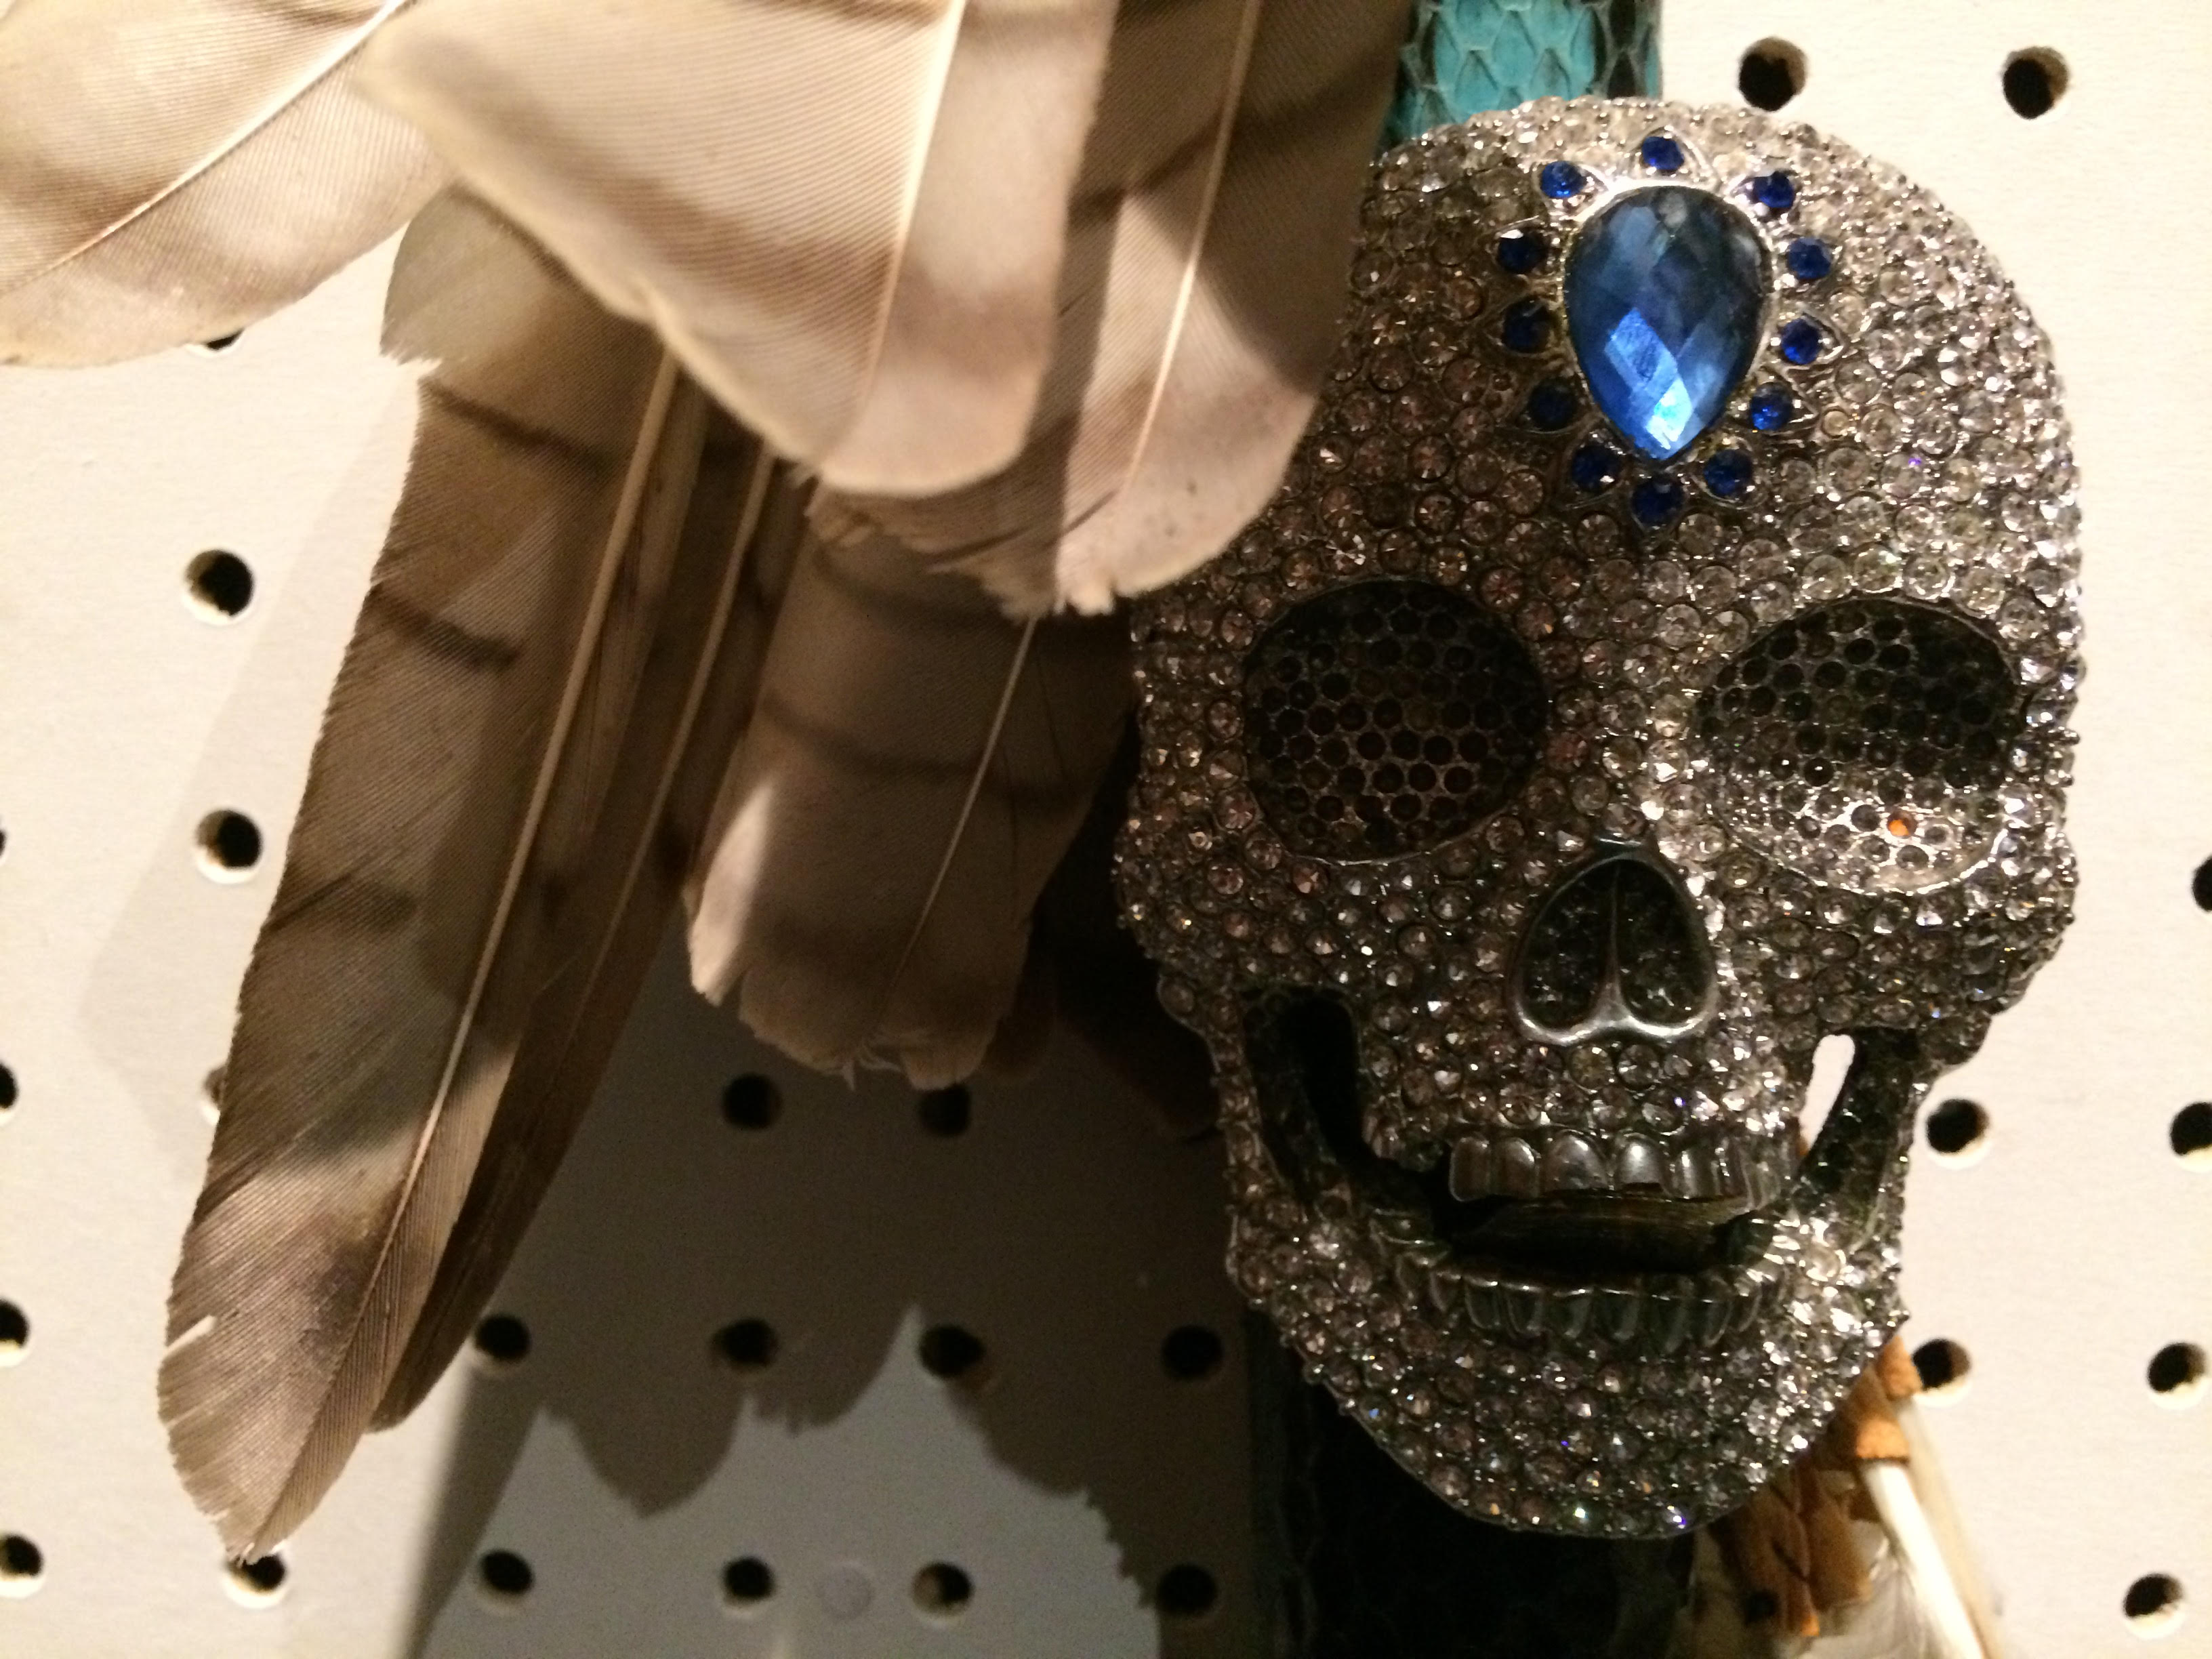 close-up of bird feathers and a jewel-encrusted skull